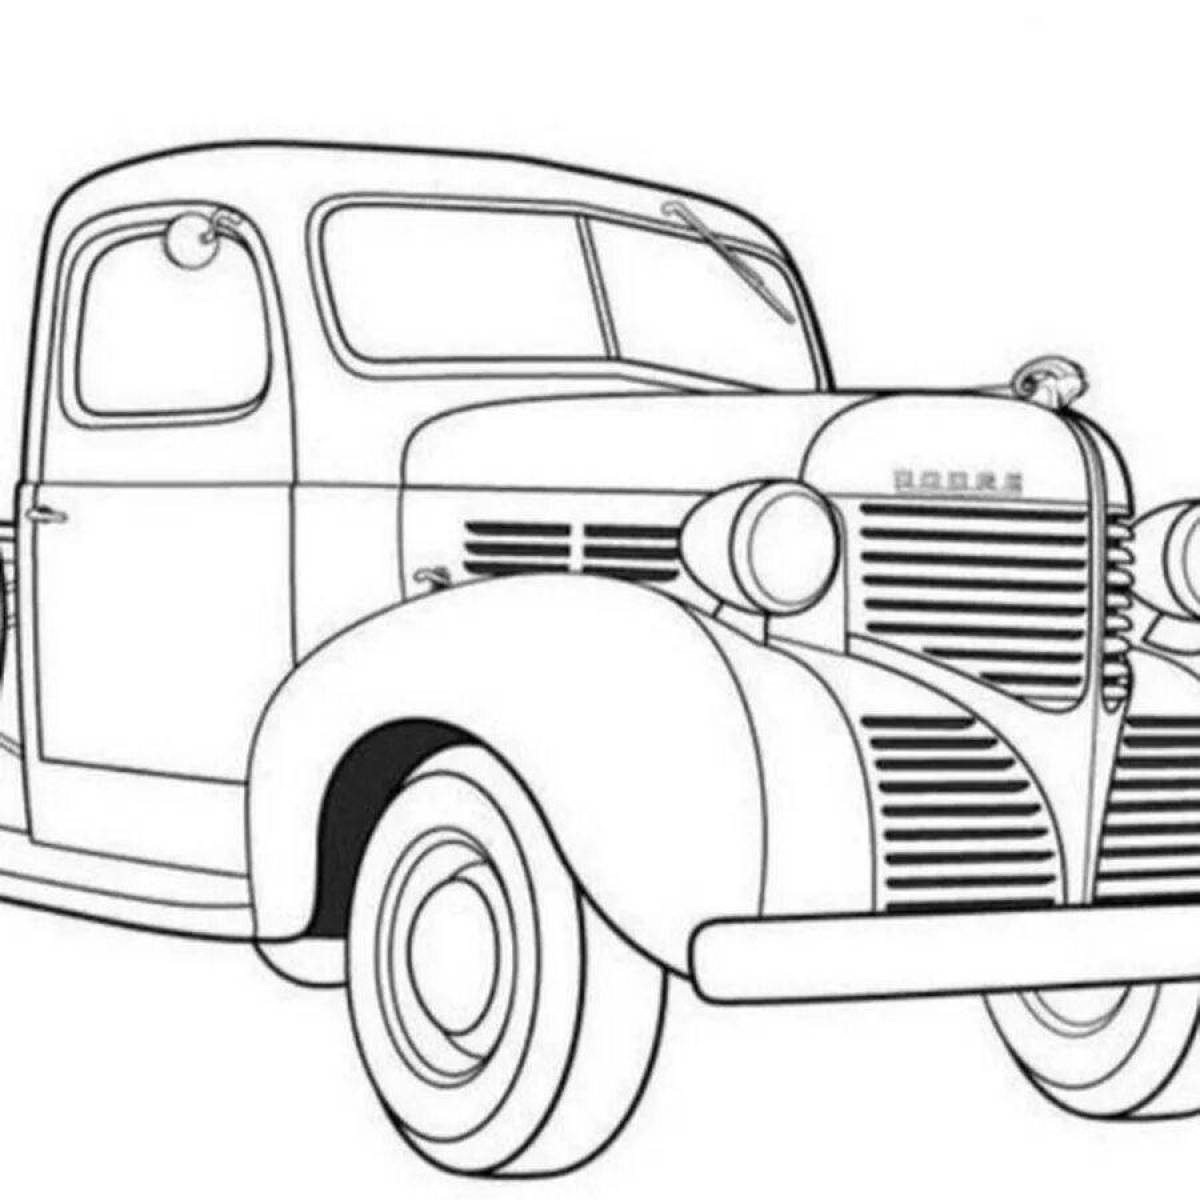 Coloring pages wonderful truck for kids